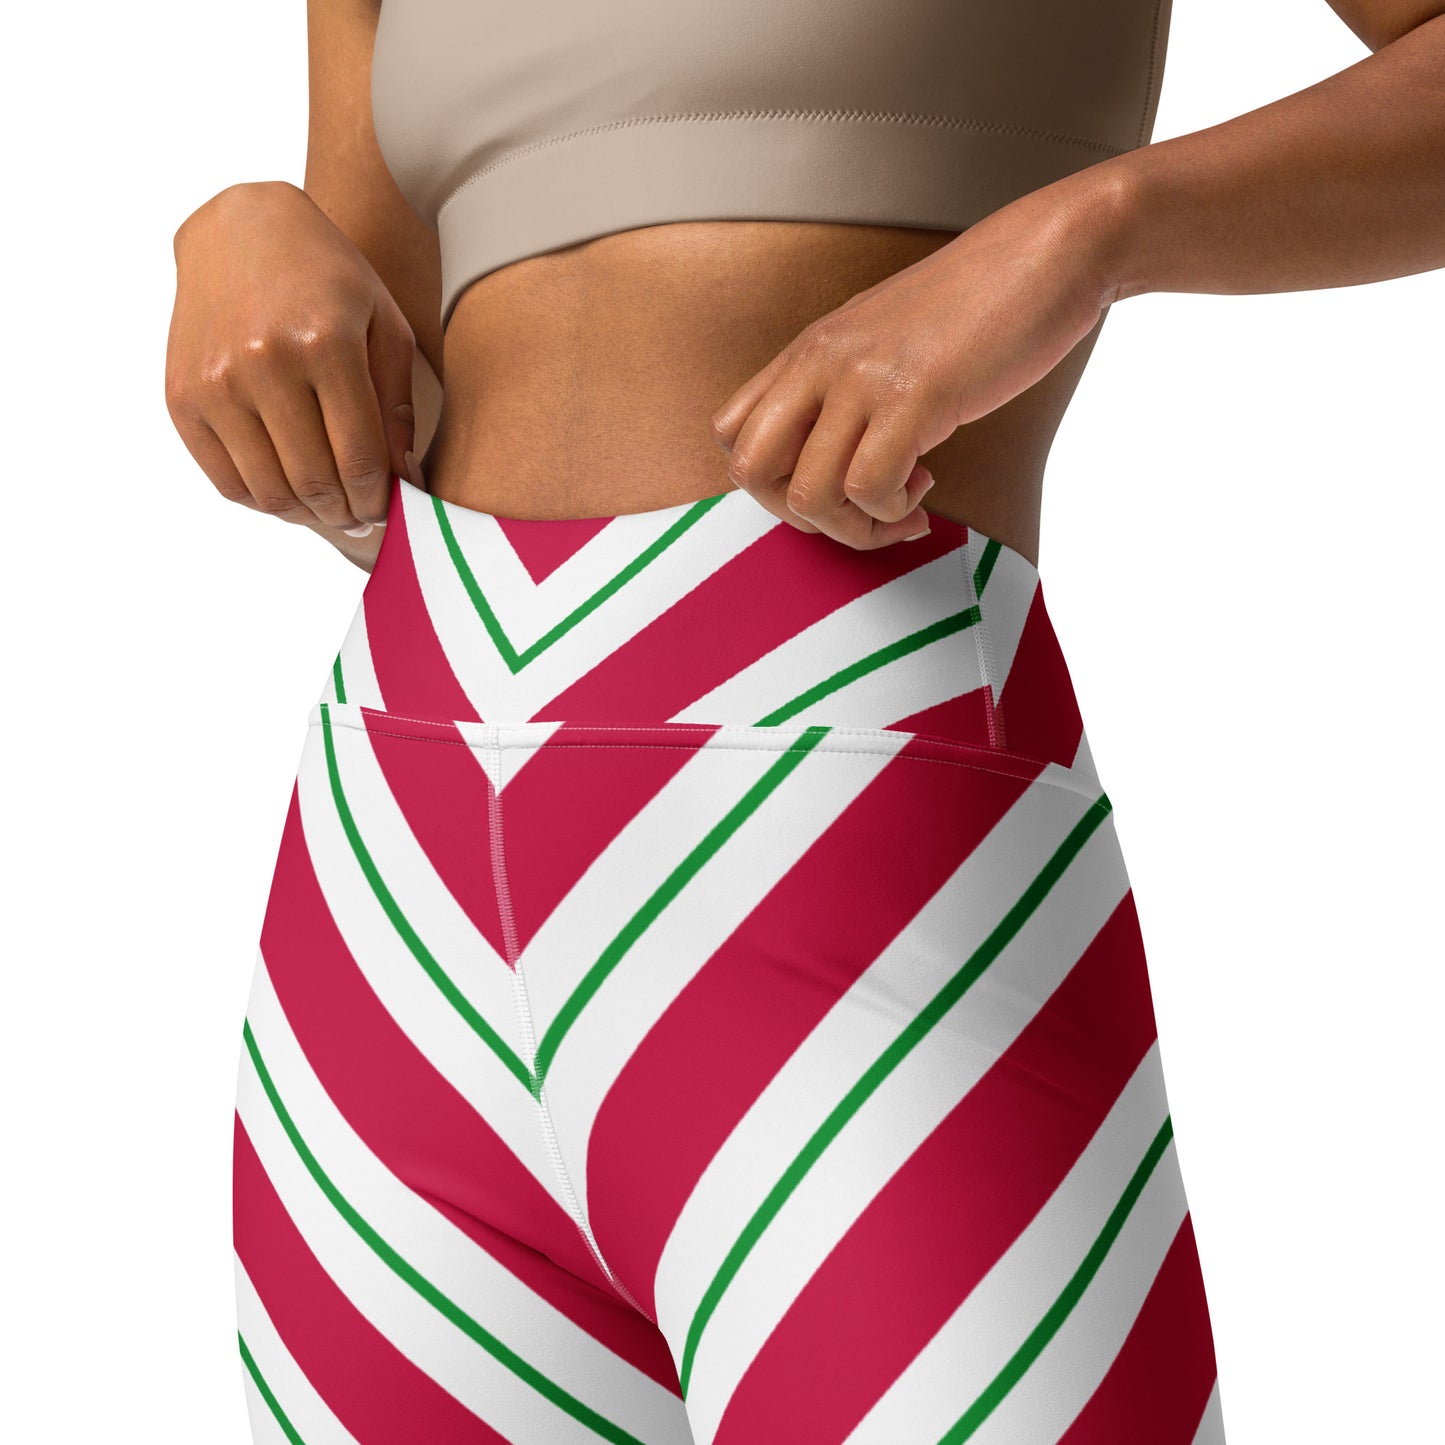 Candy Cane Leggings Women, High Waisted Yoga Red White Green Striped Christmas Graphic Printed Ladies Wear Holiday Xmas Pants